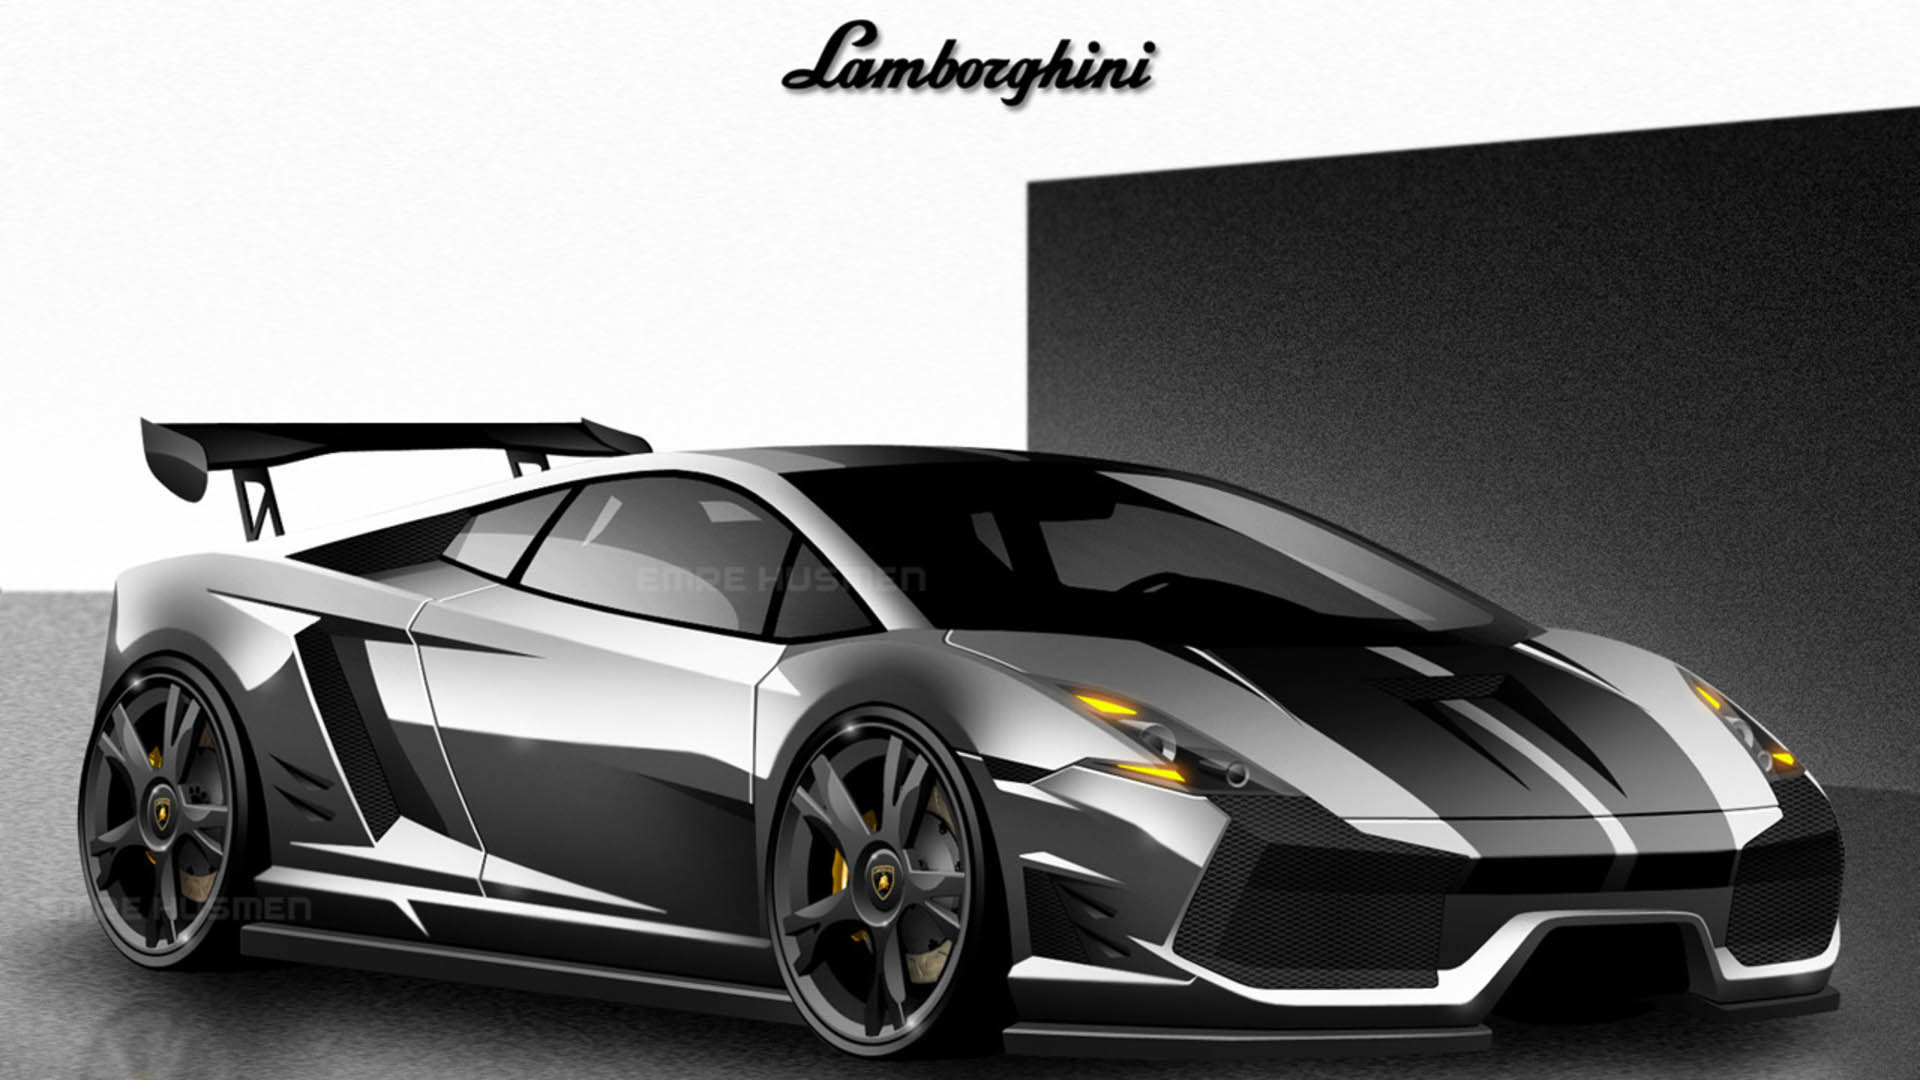 Lamborghini Background free download Wallpapers, Backgrounds